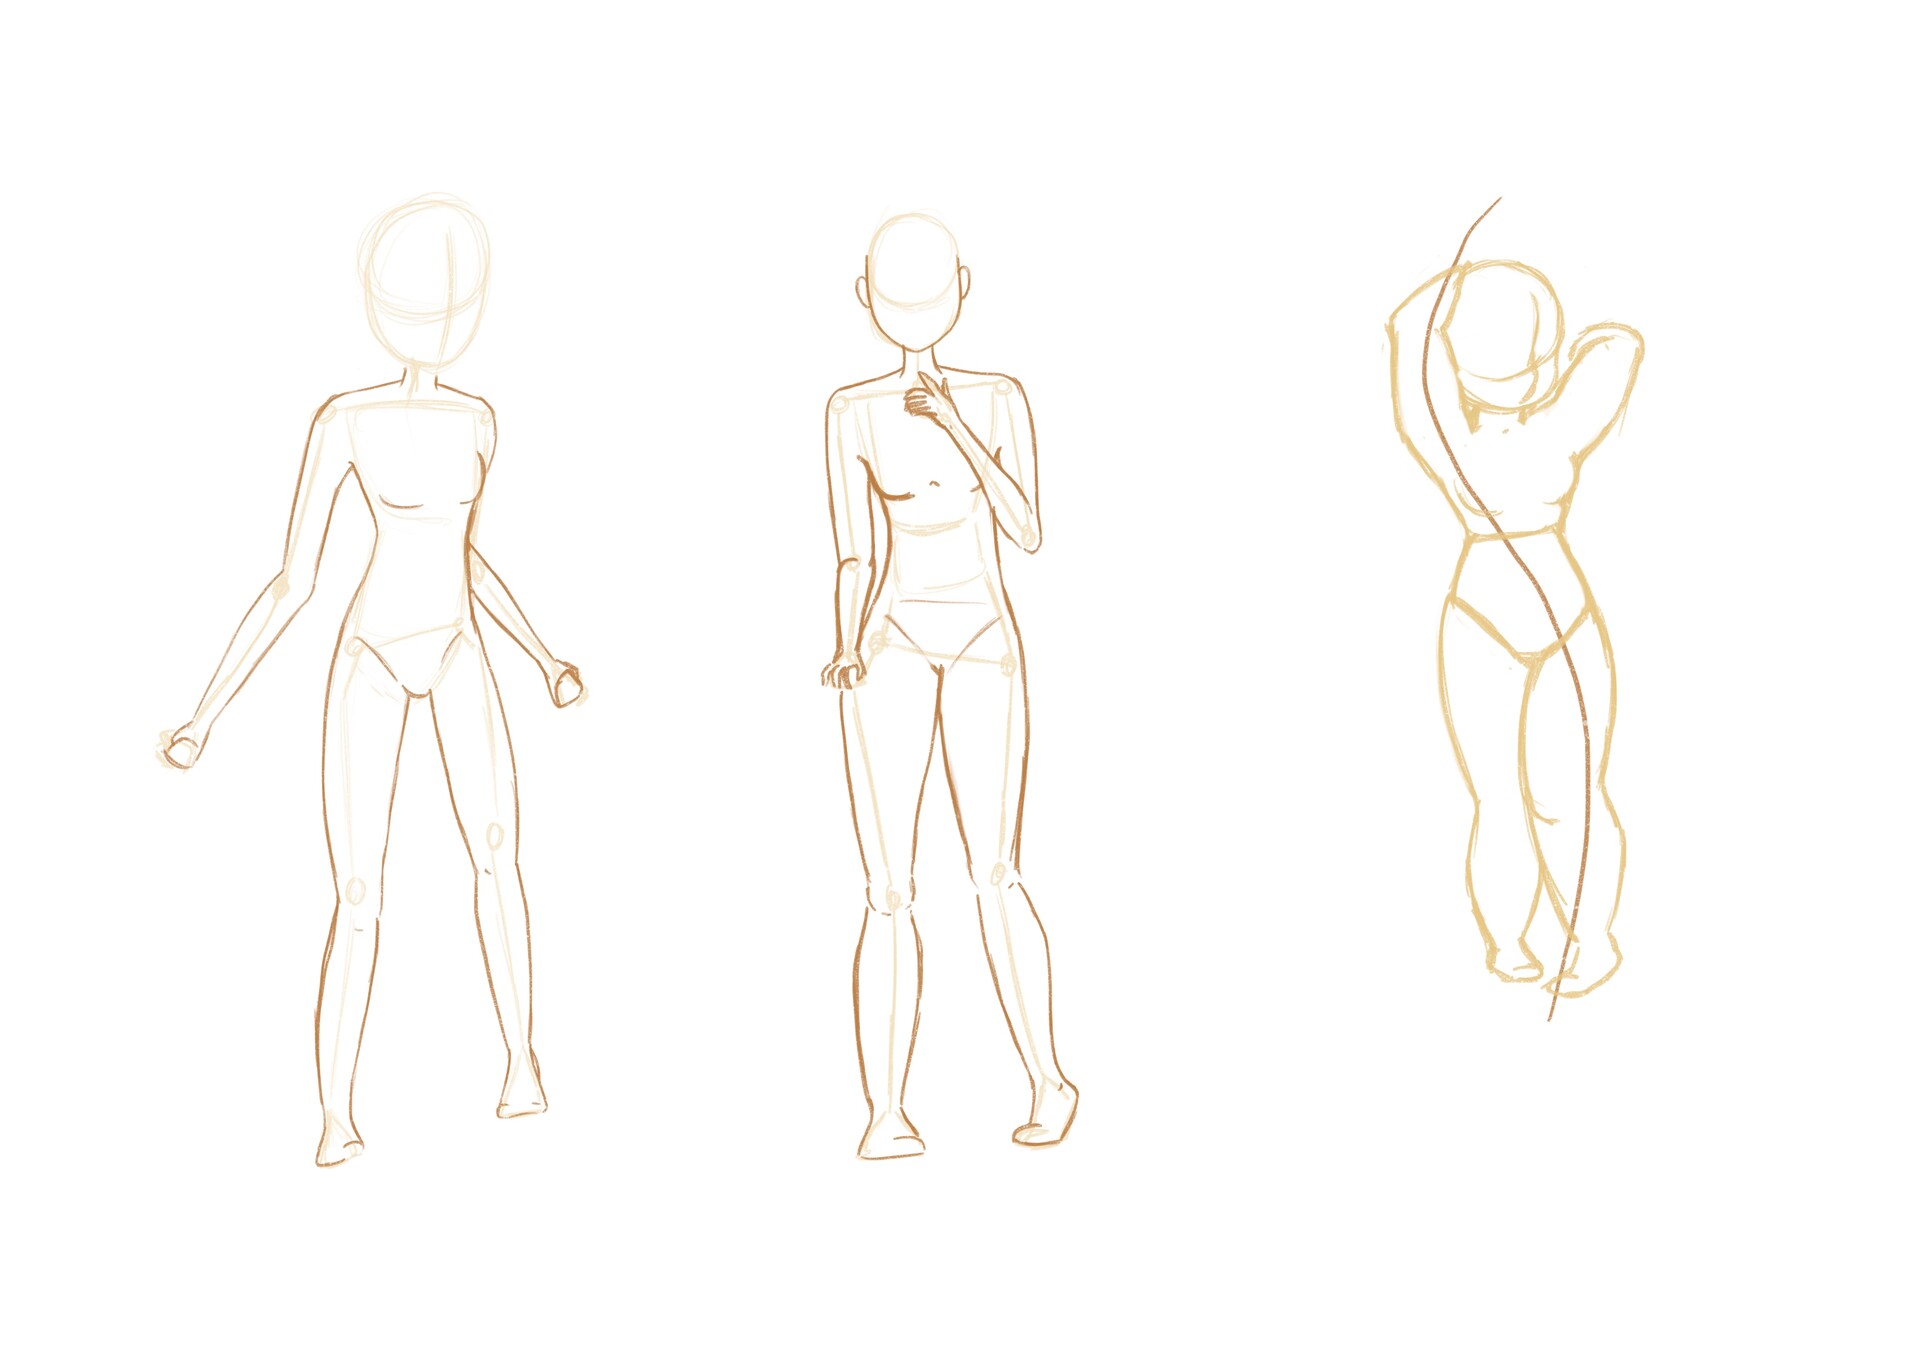 Improving my anime body poses - Art Discussions - Krita Artists